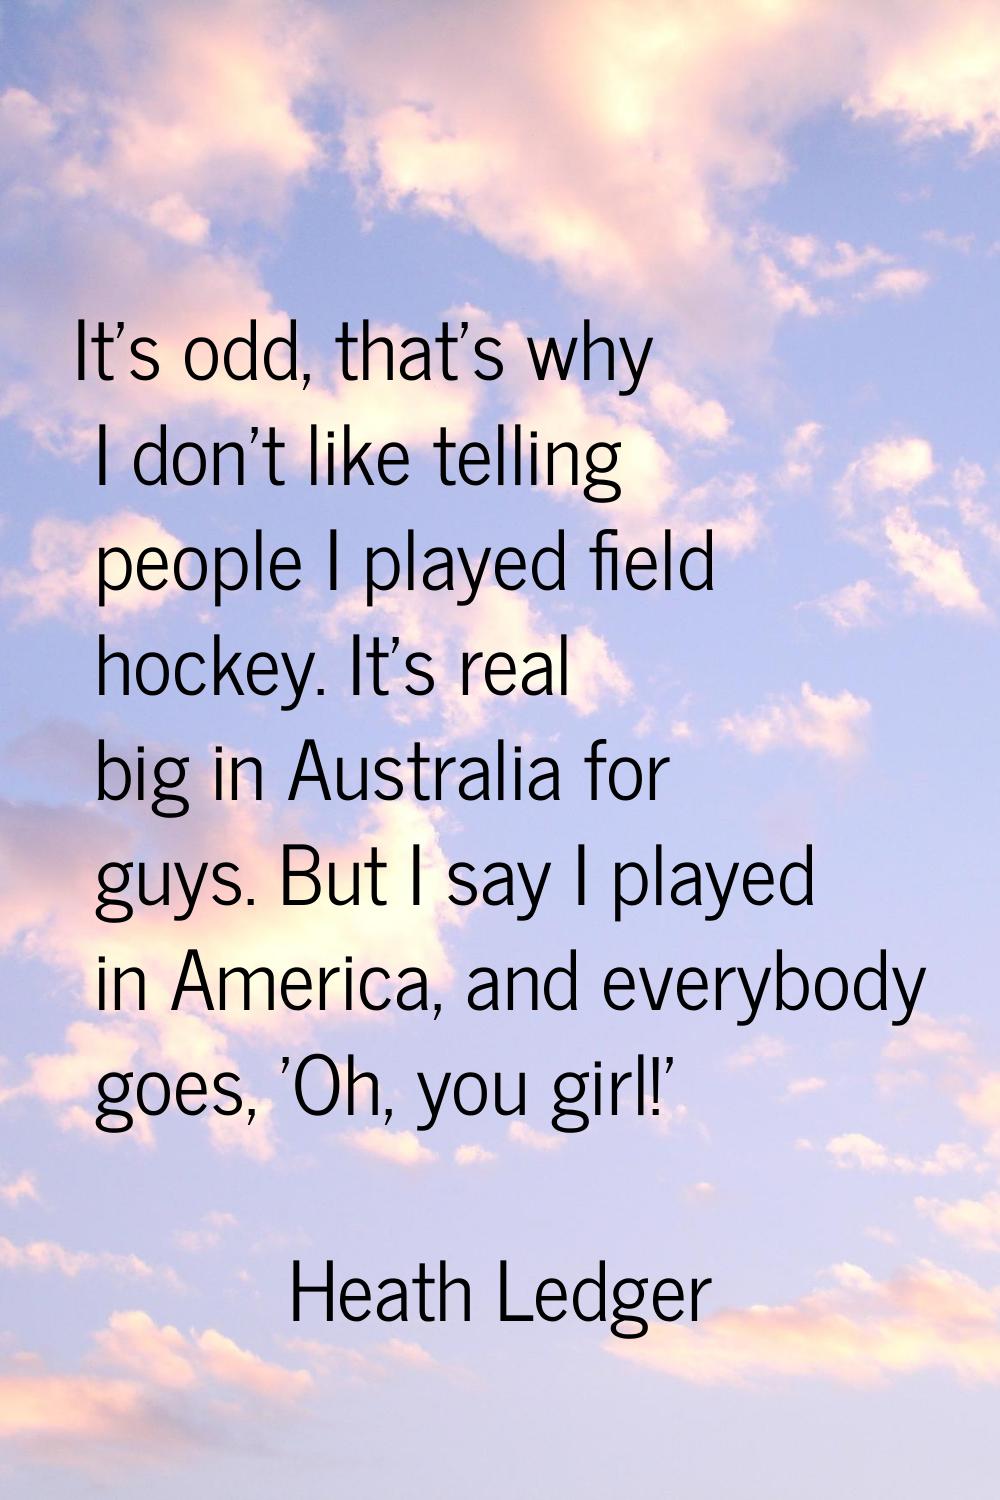 It's odd, that's why I don't like telling people I played field hockey. It's real big in Australia 